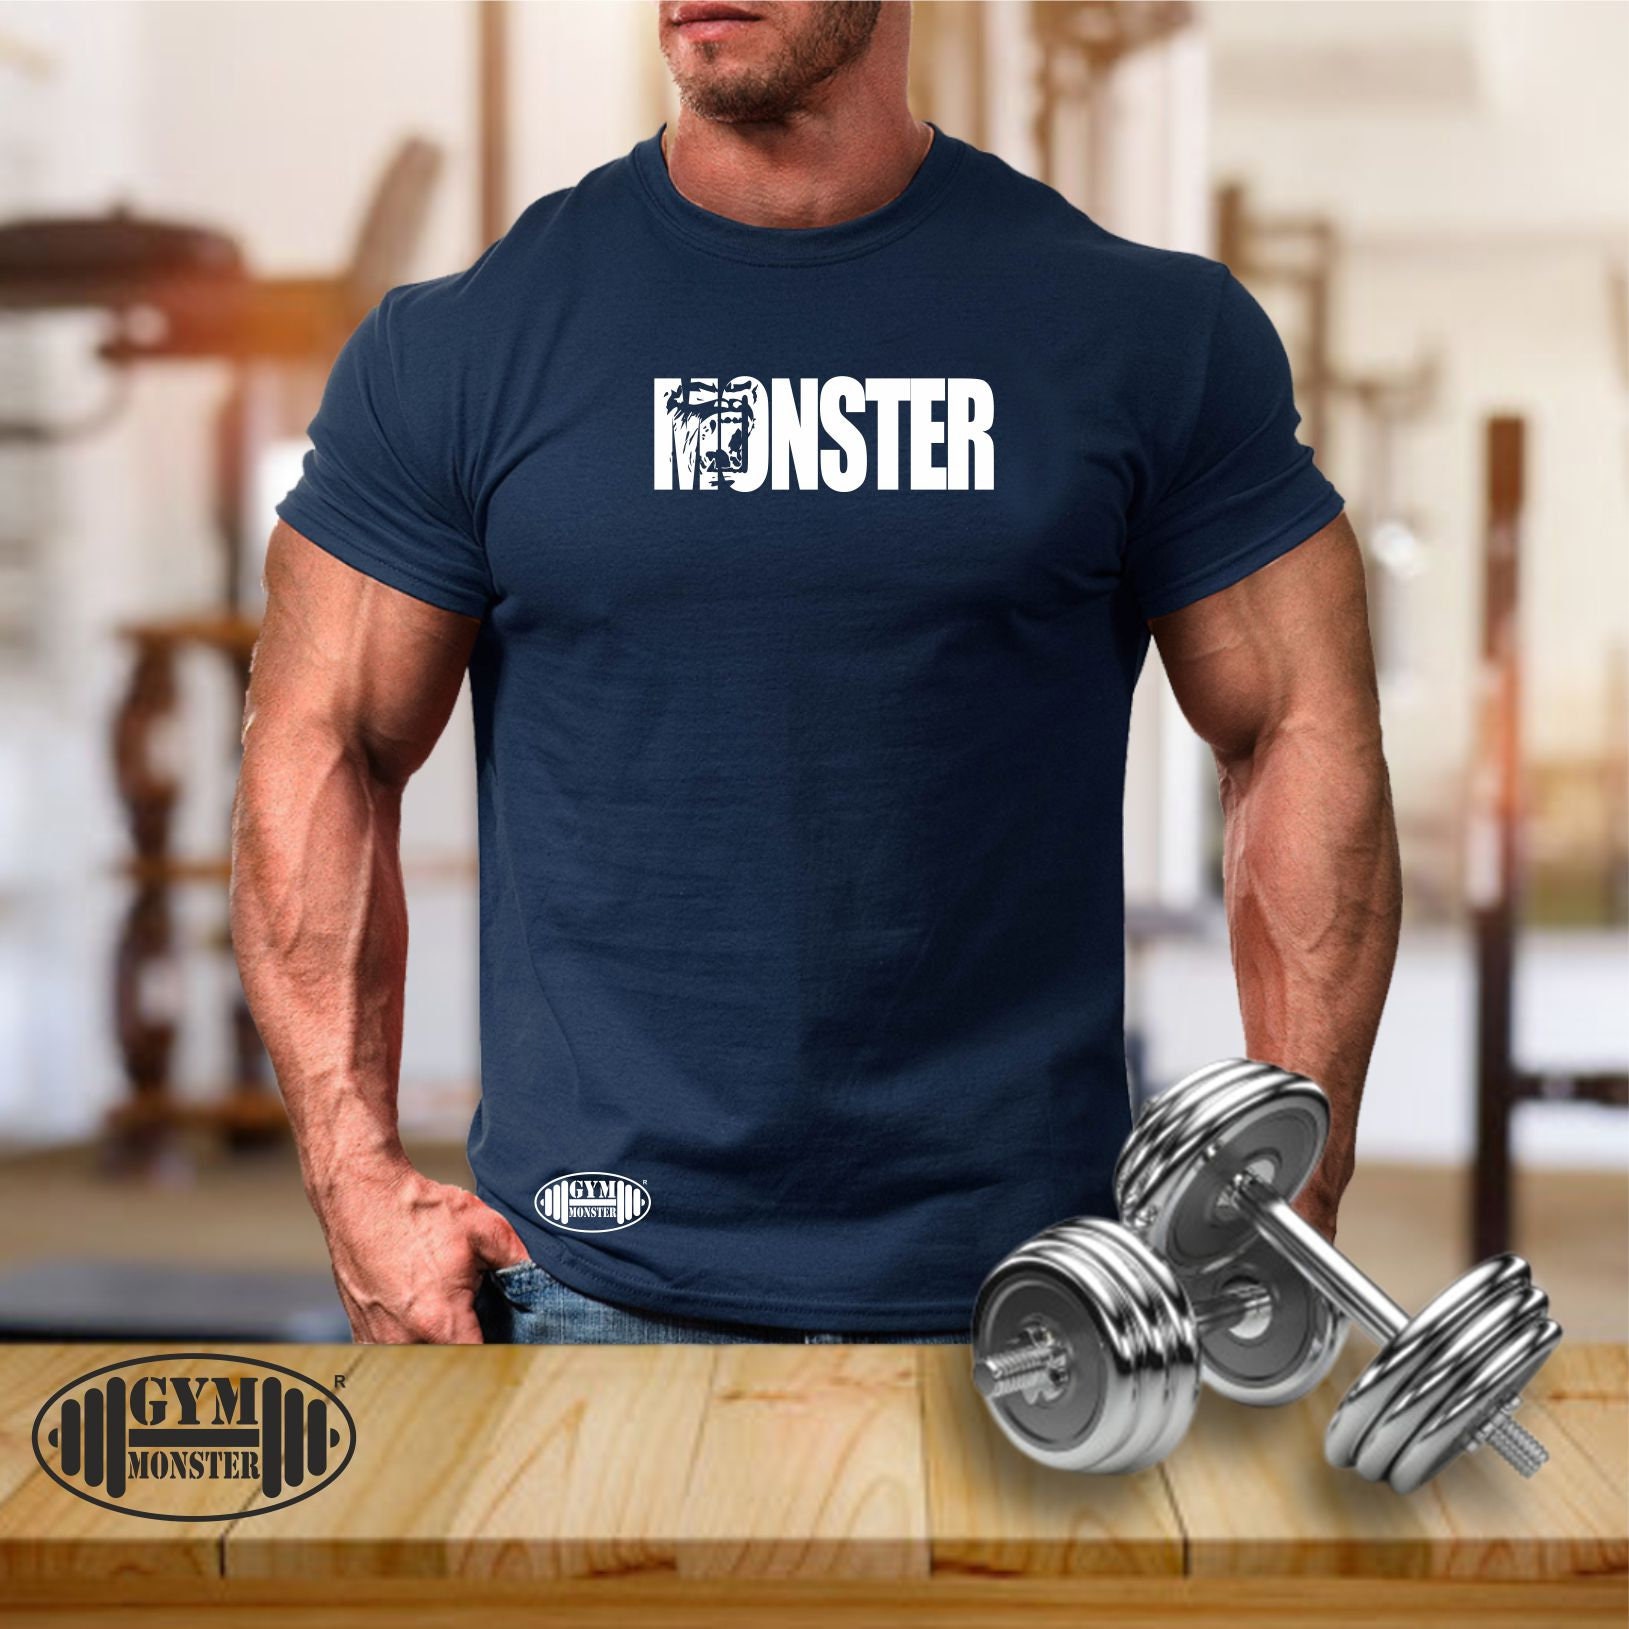 Monster T Gym Clothing Bodybuilding Training Workout - Etsy